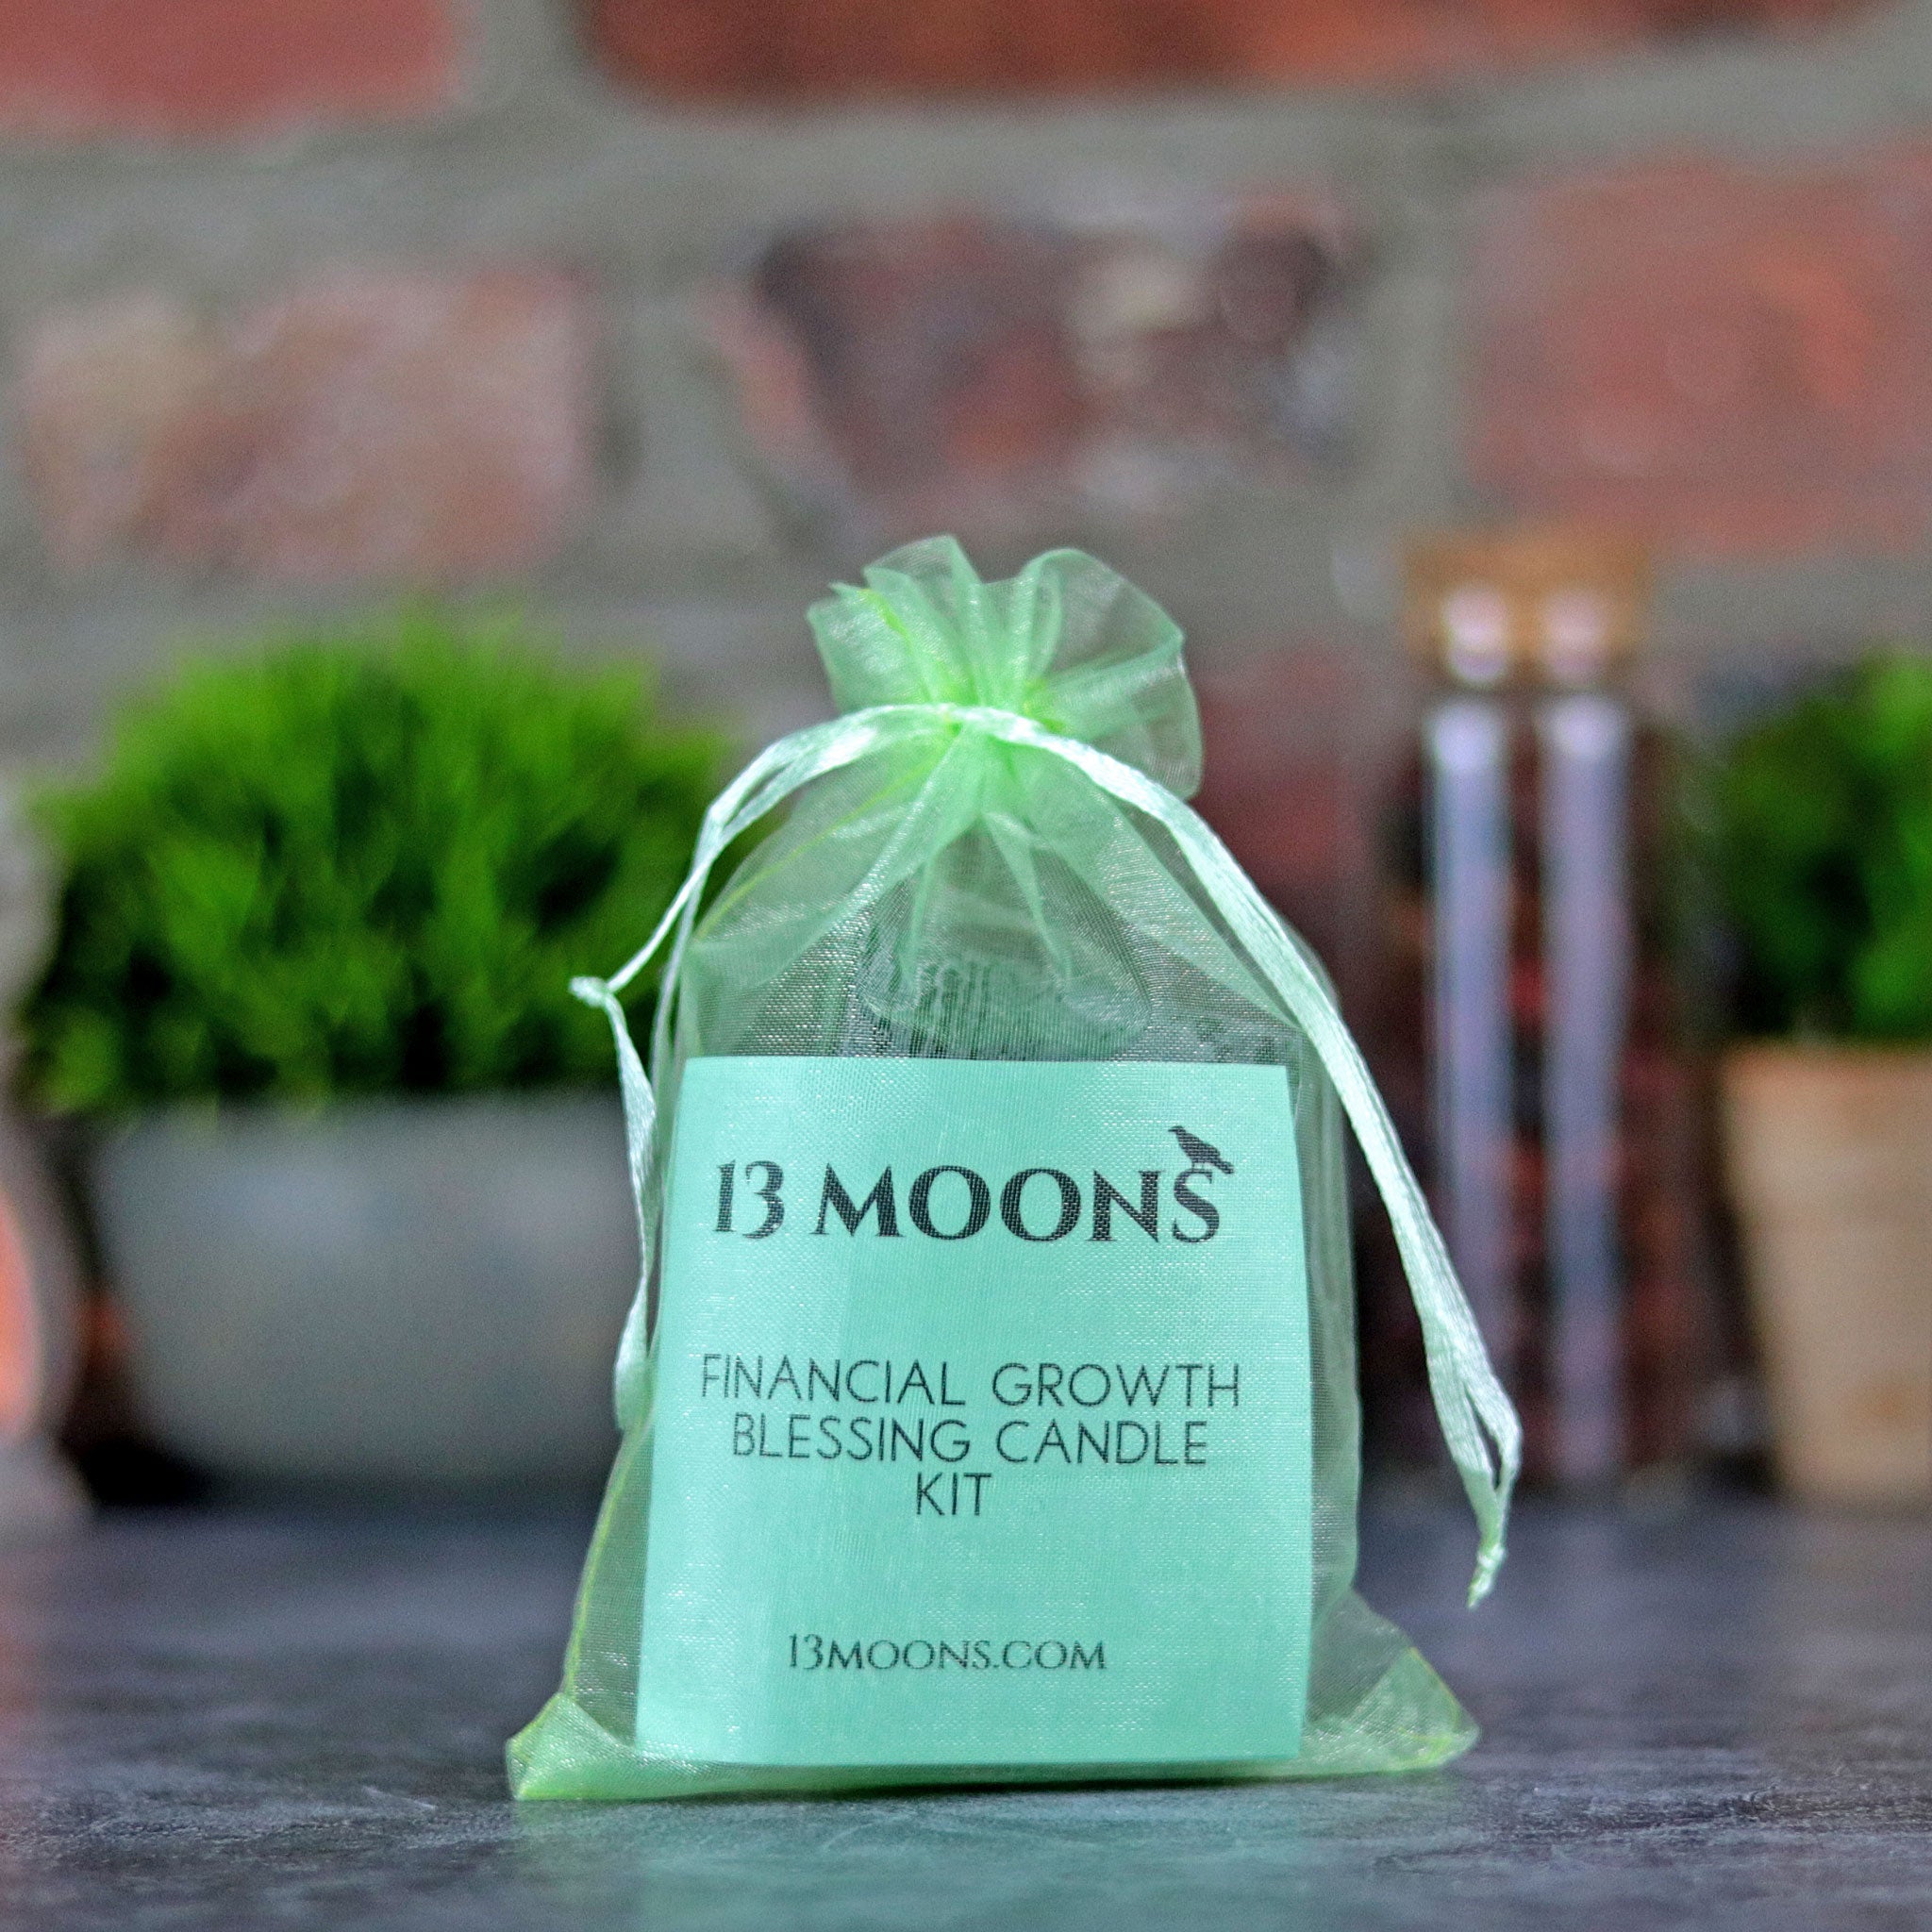 Financial Growth Blessing Candle Kit - 13 Moons